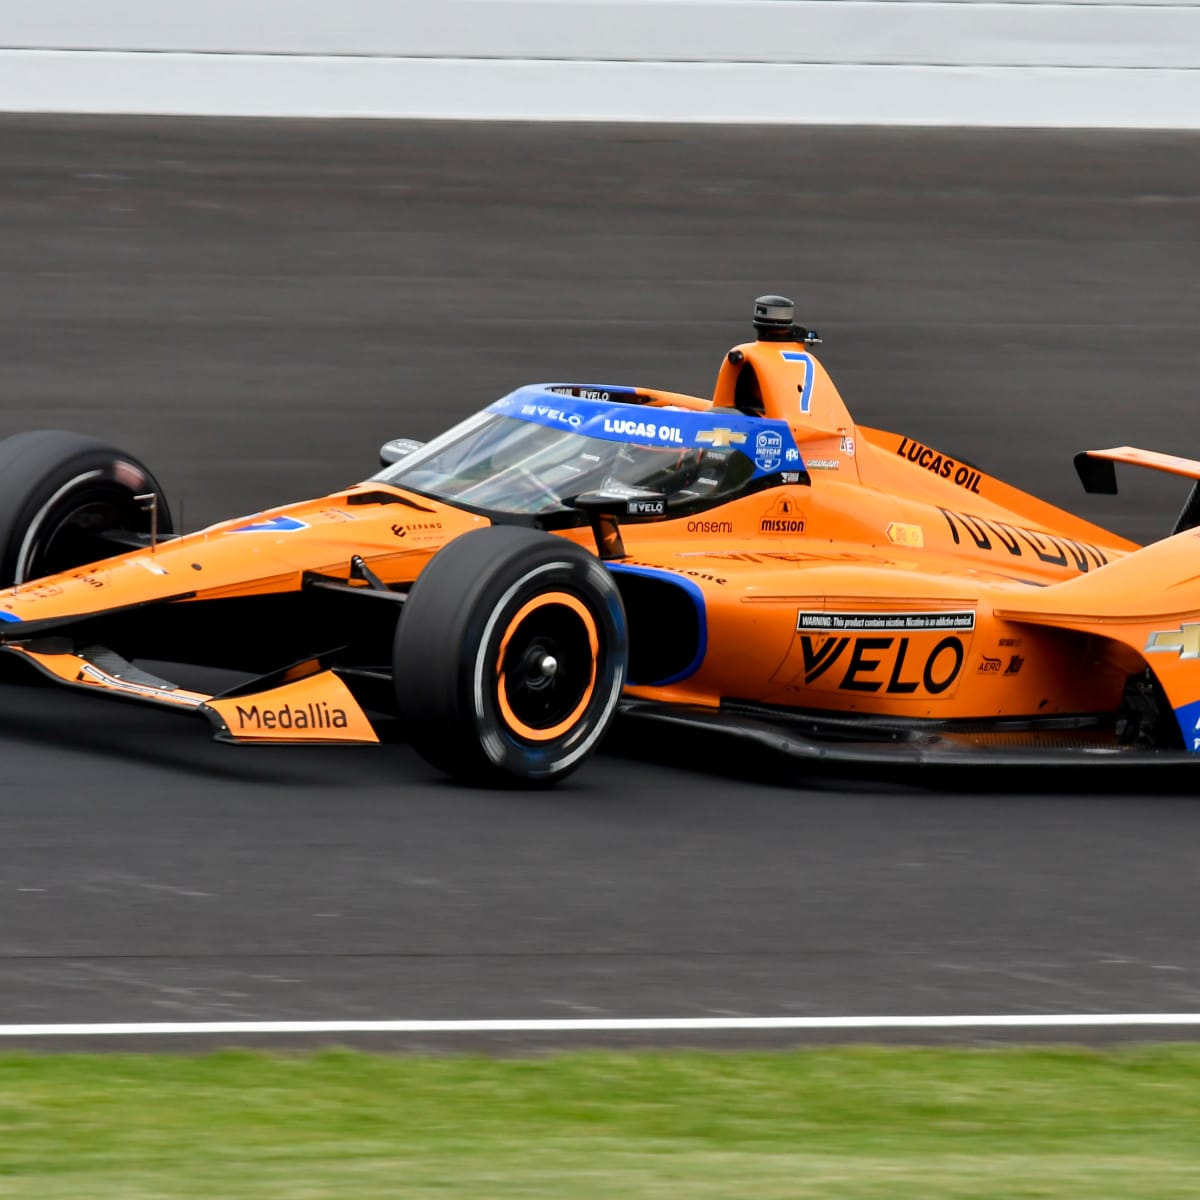 Watch Honda Indy 200 at Mid-Ohio Stream IndyCar live, TV channel - How to Watch and Stream Major League and College Sports